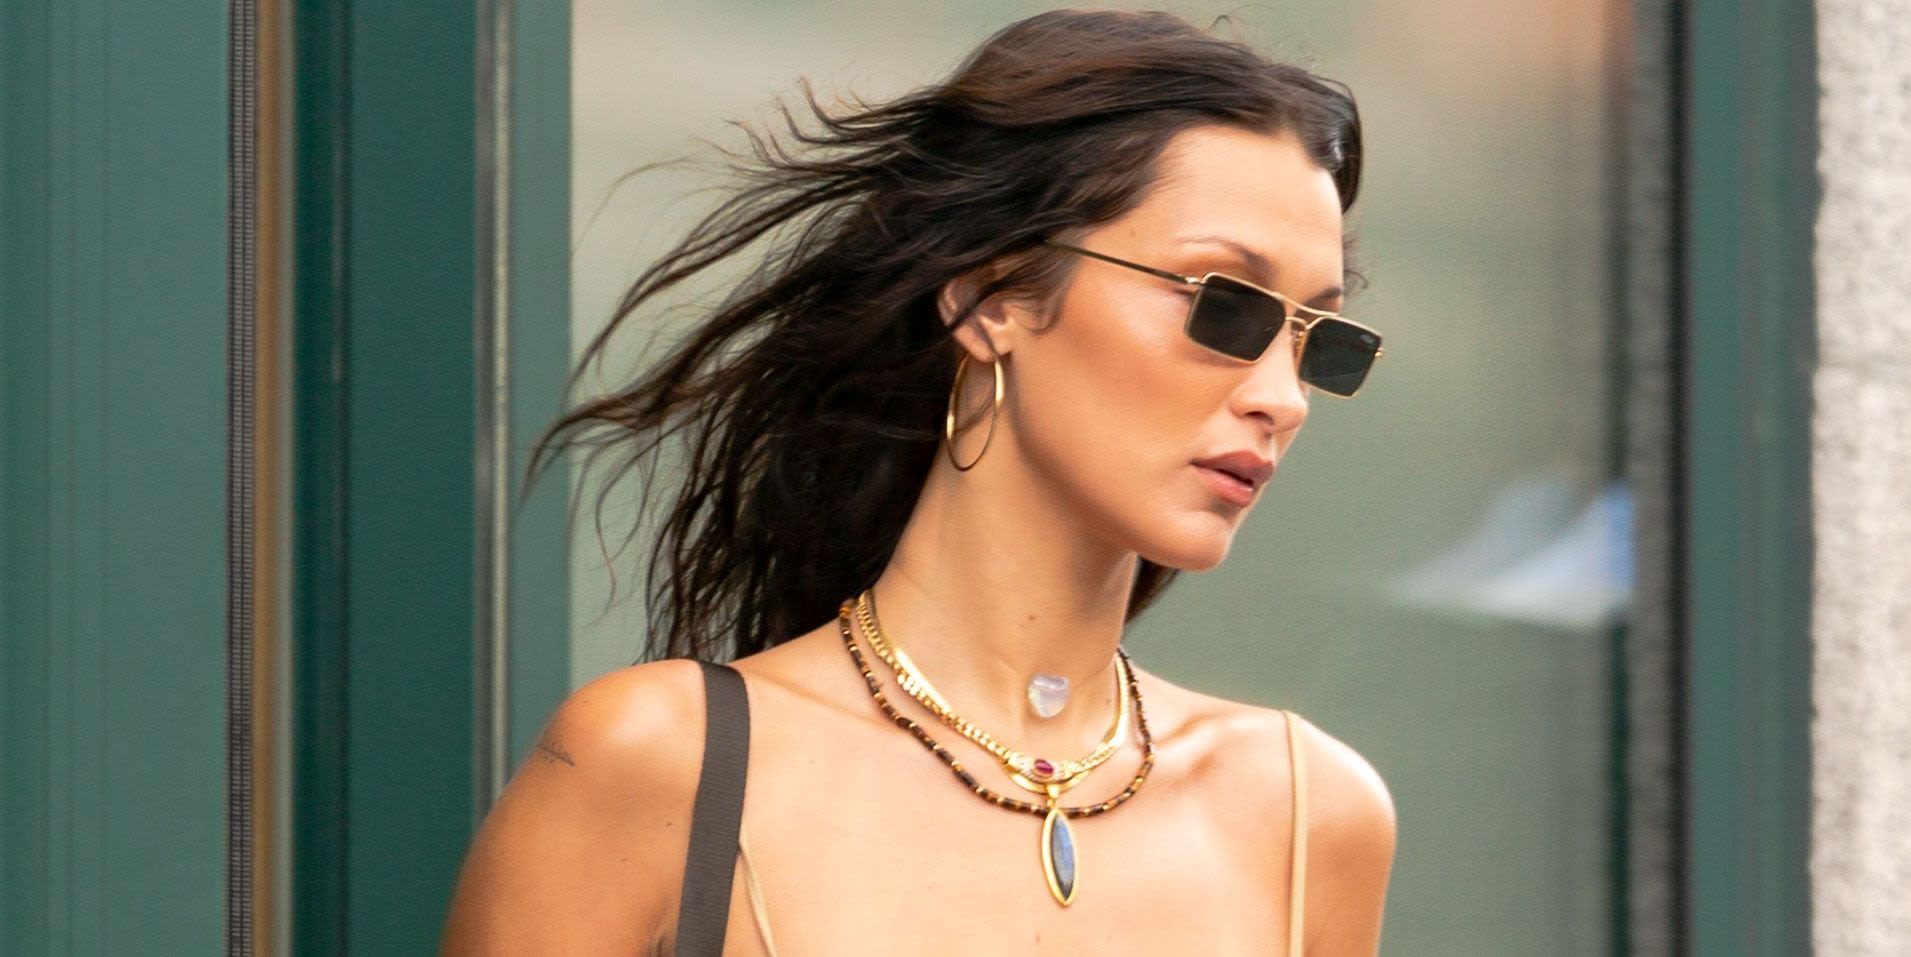 Bella Hadid's crop top, suede skirt and cowboy boots nail Westerncore